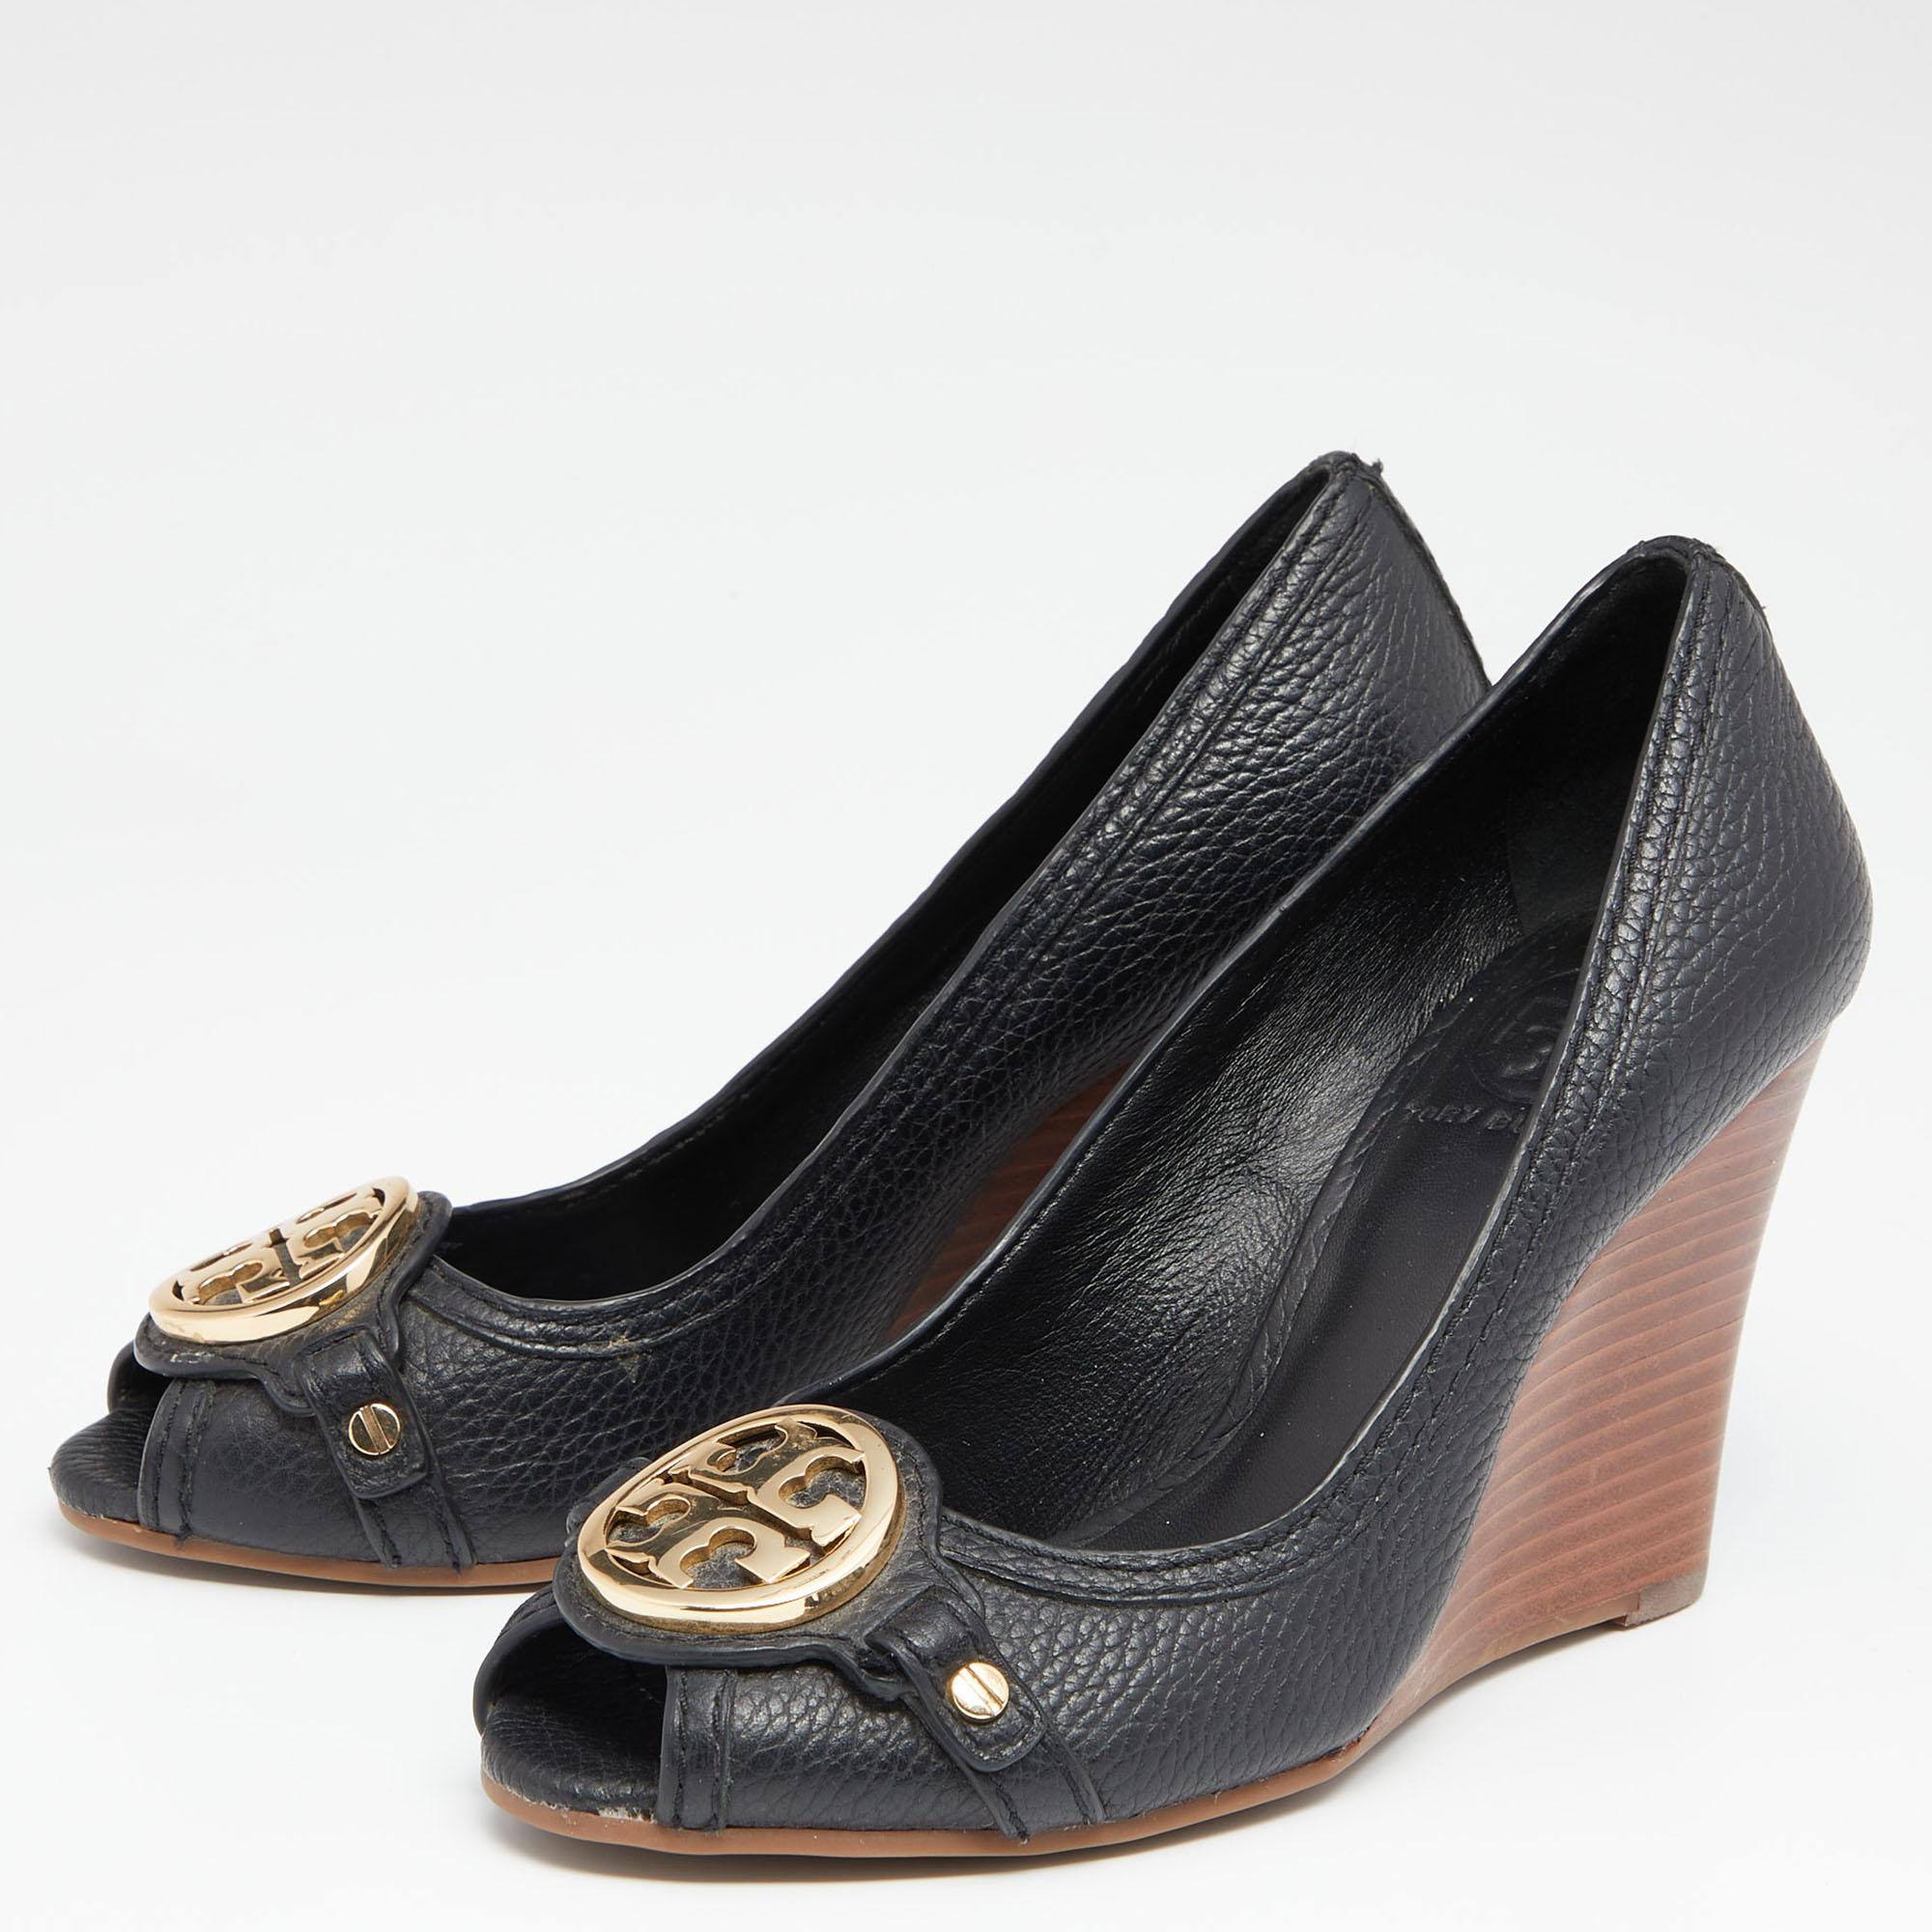 

Tory Burch Black Leather Leticia Wedge Peep Toe Pumps Size